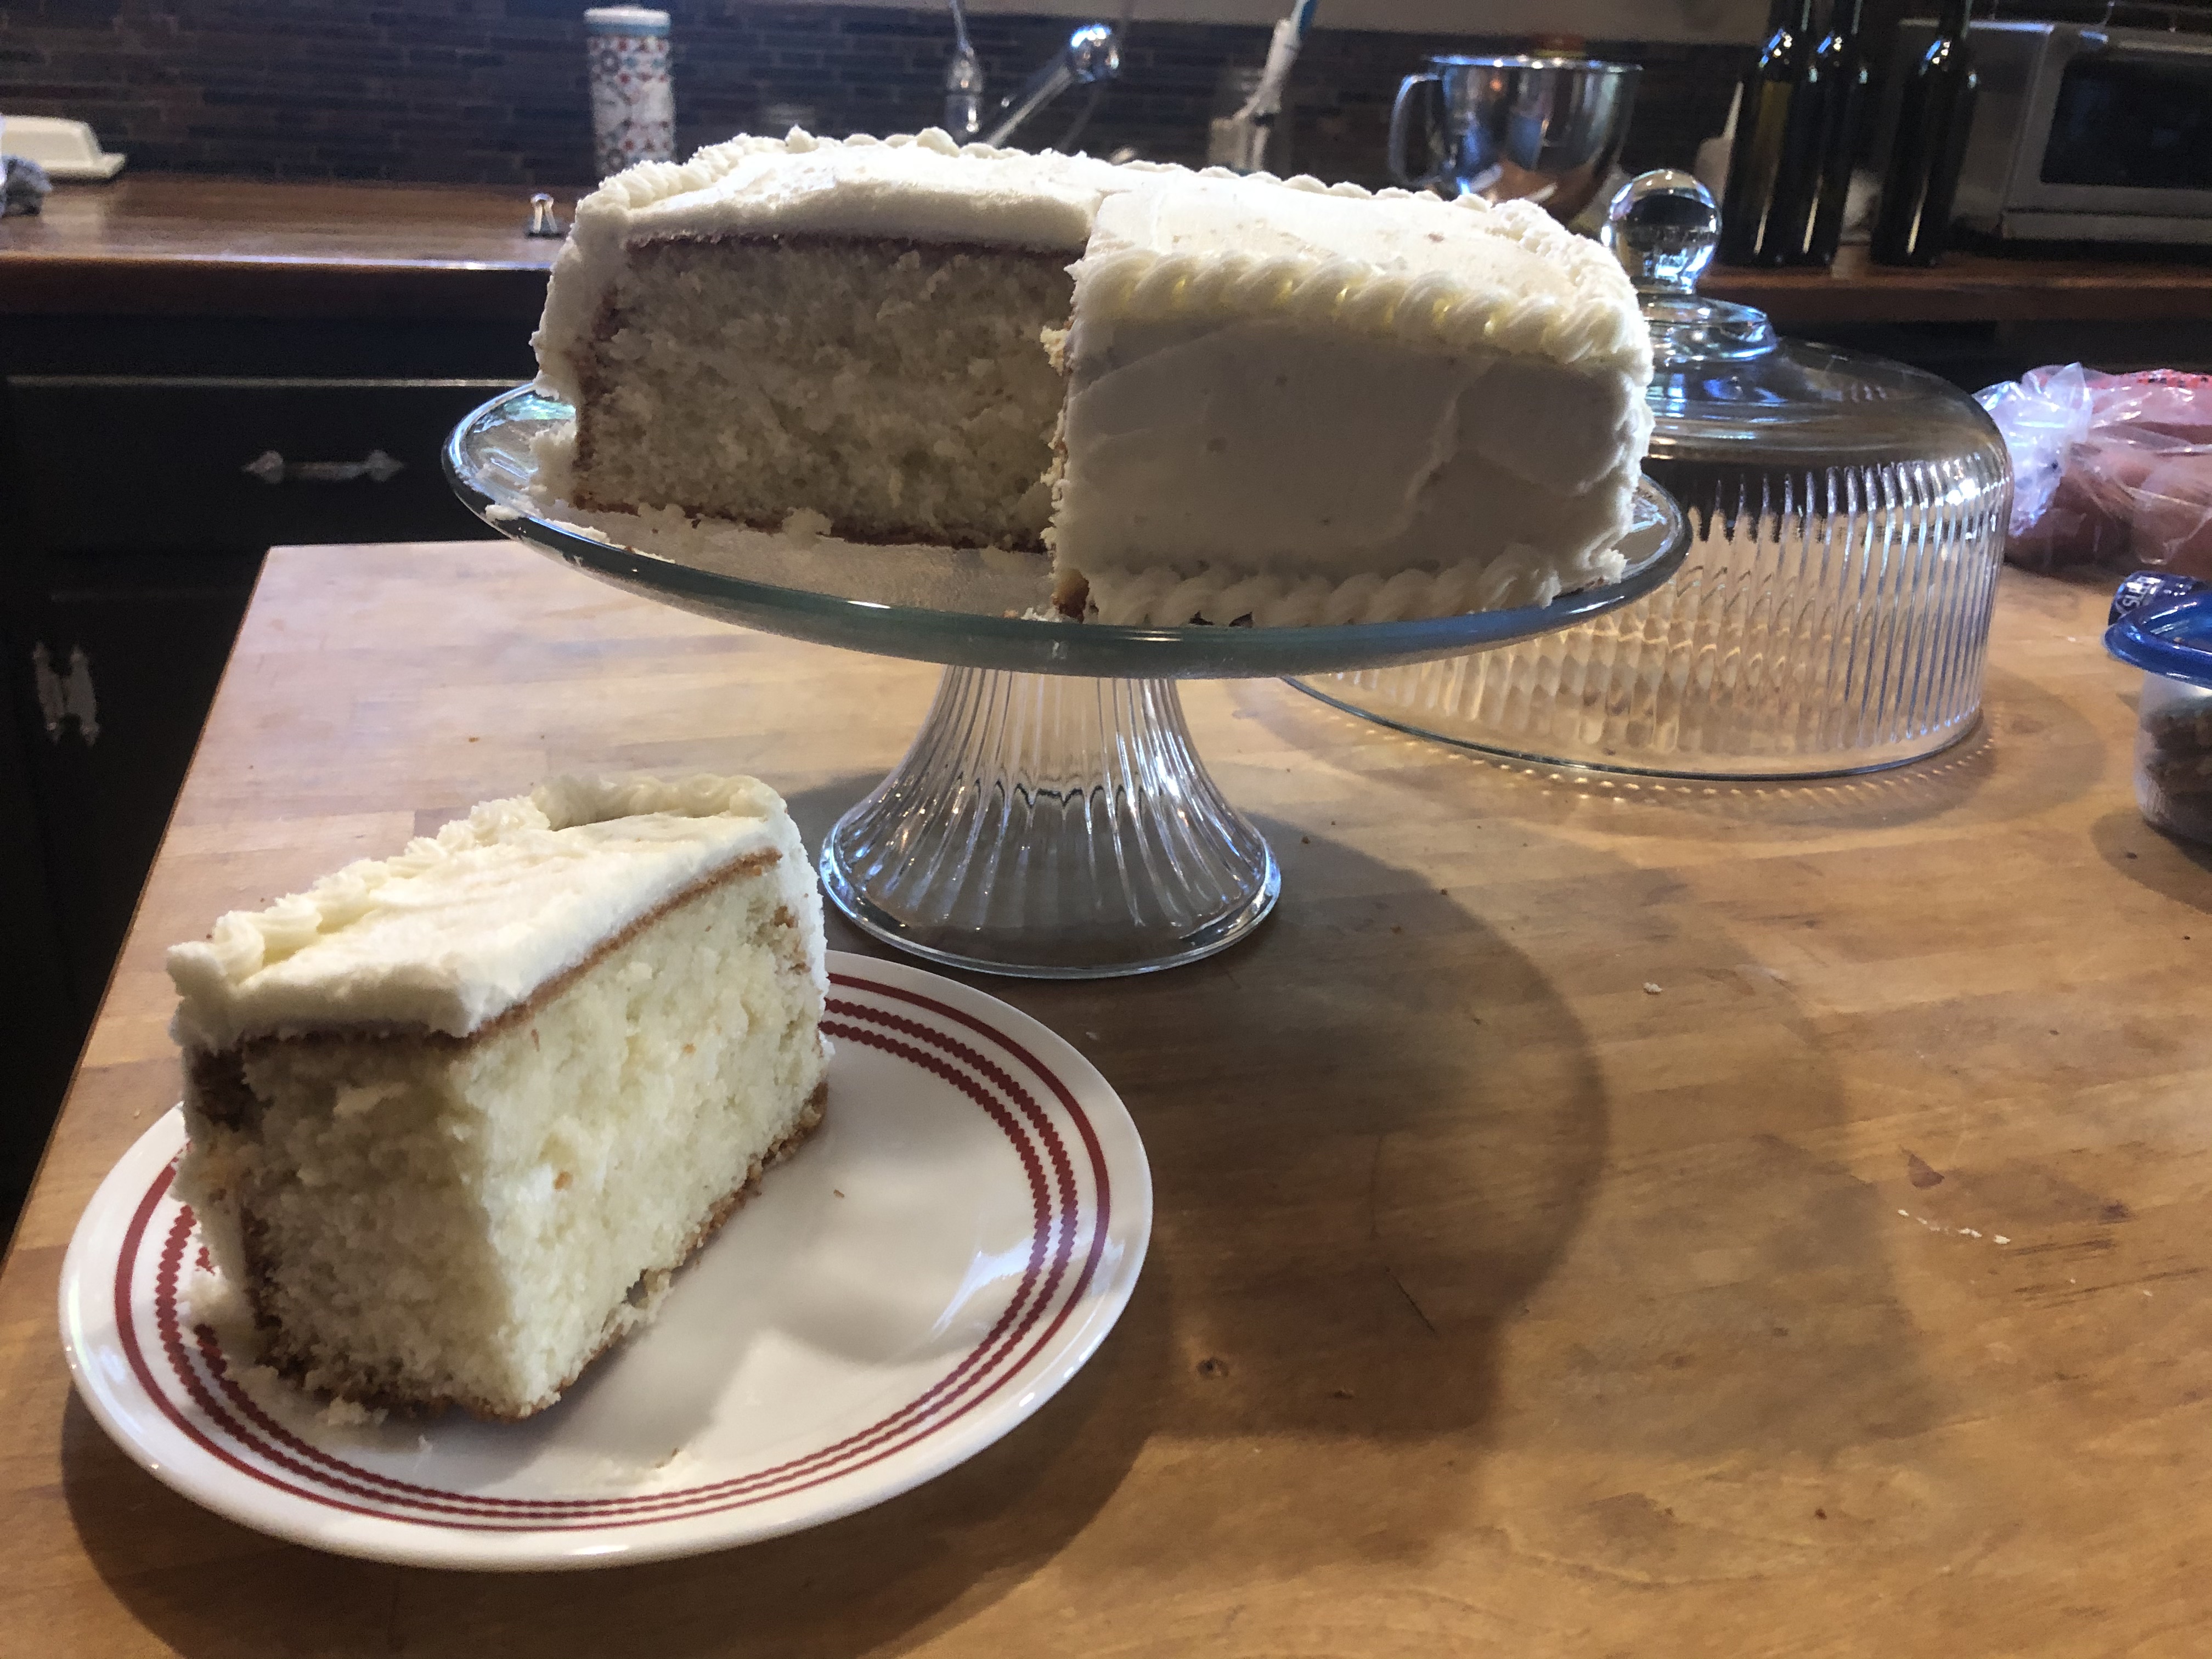 Square white cake with frosting with one slice on a plate next to it